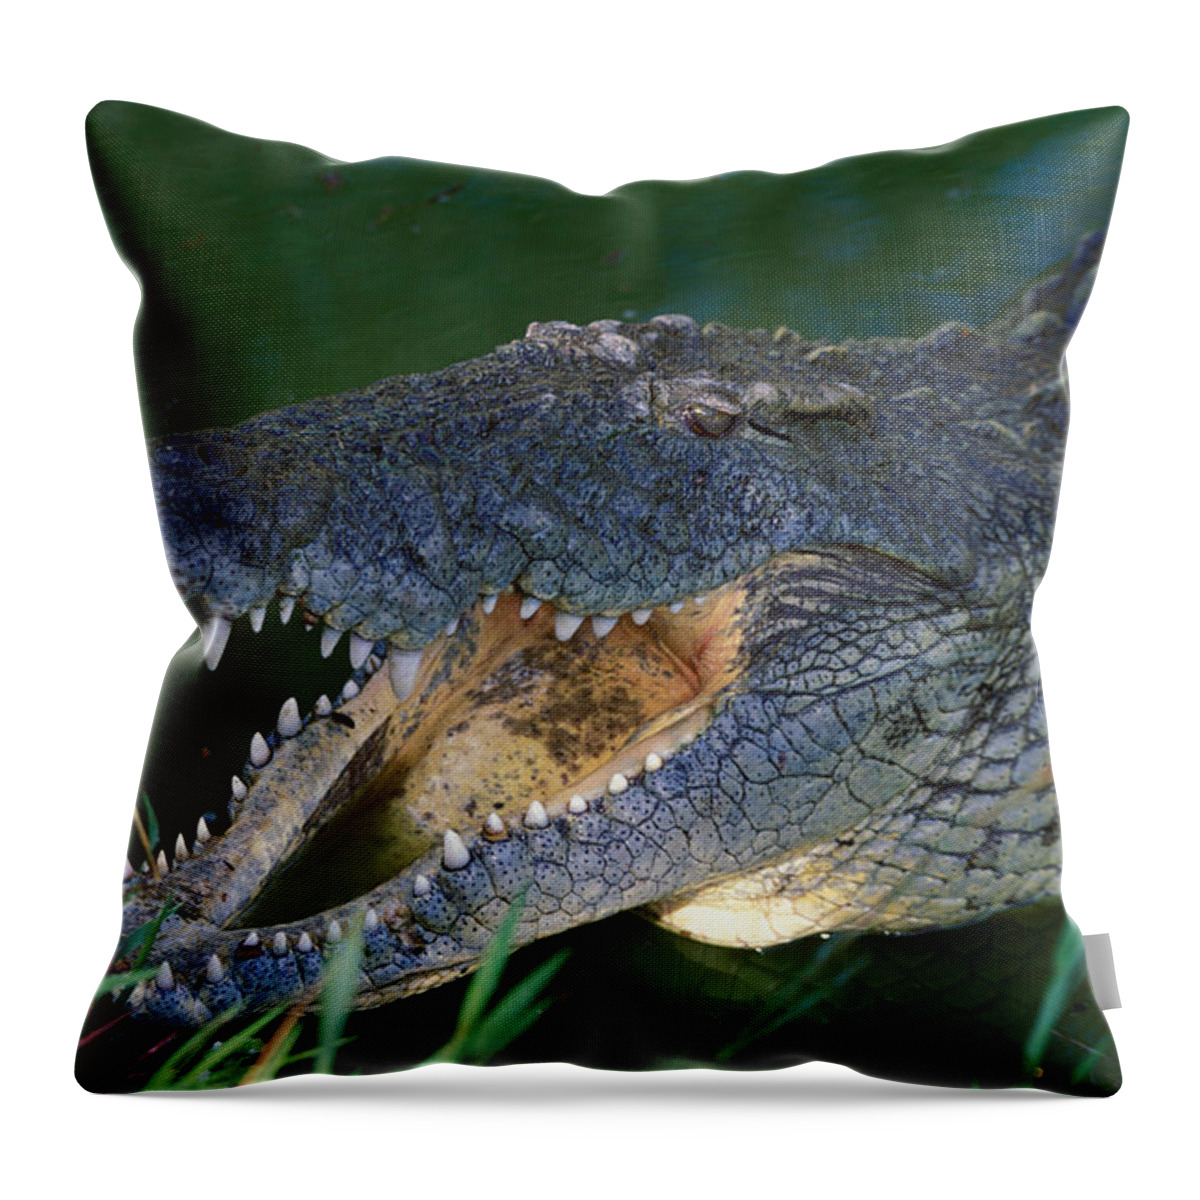 Croc Throw Pillow featuring the photograph Nile Crocodile #1 by Nigel J. Dennis